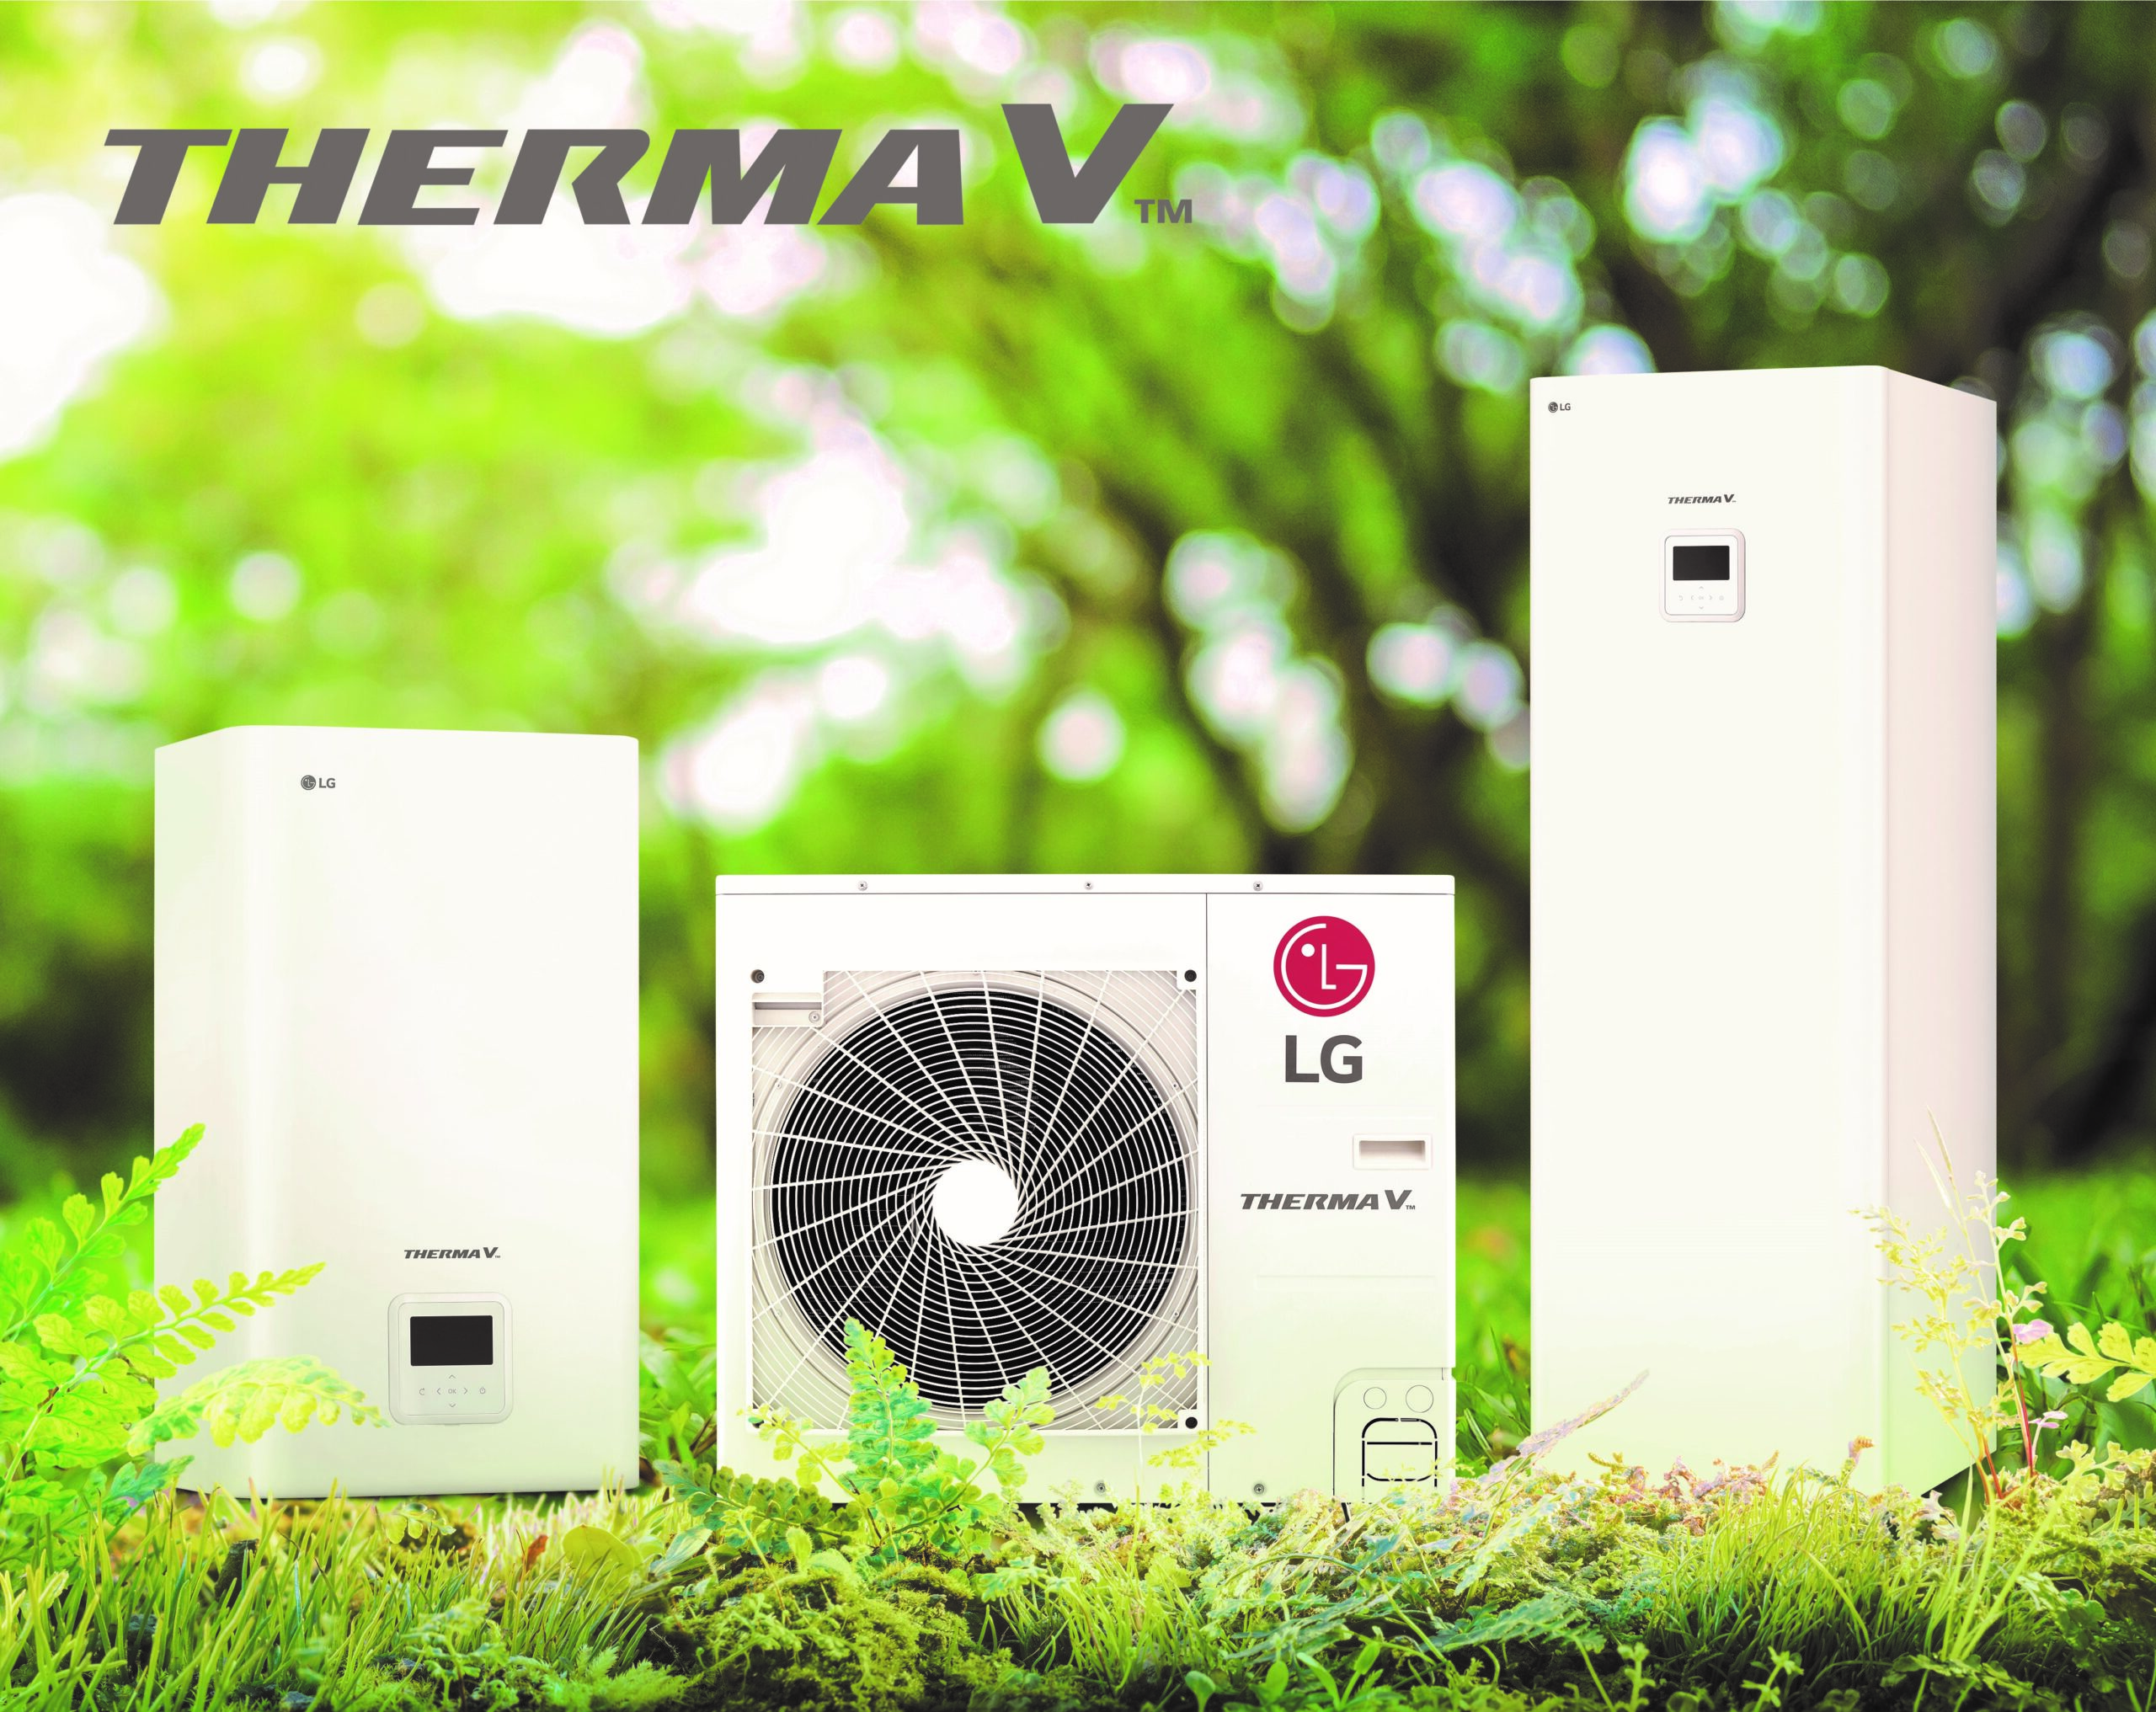 LG Therma V products placed on the grass